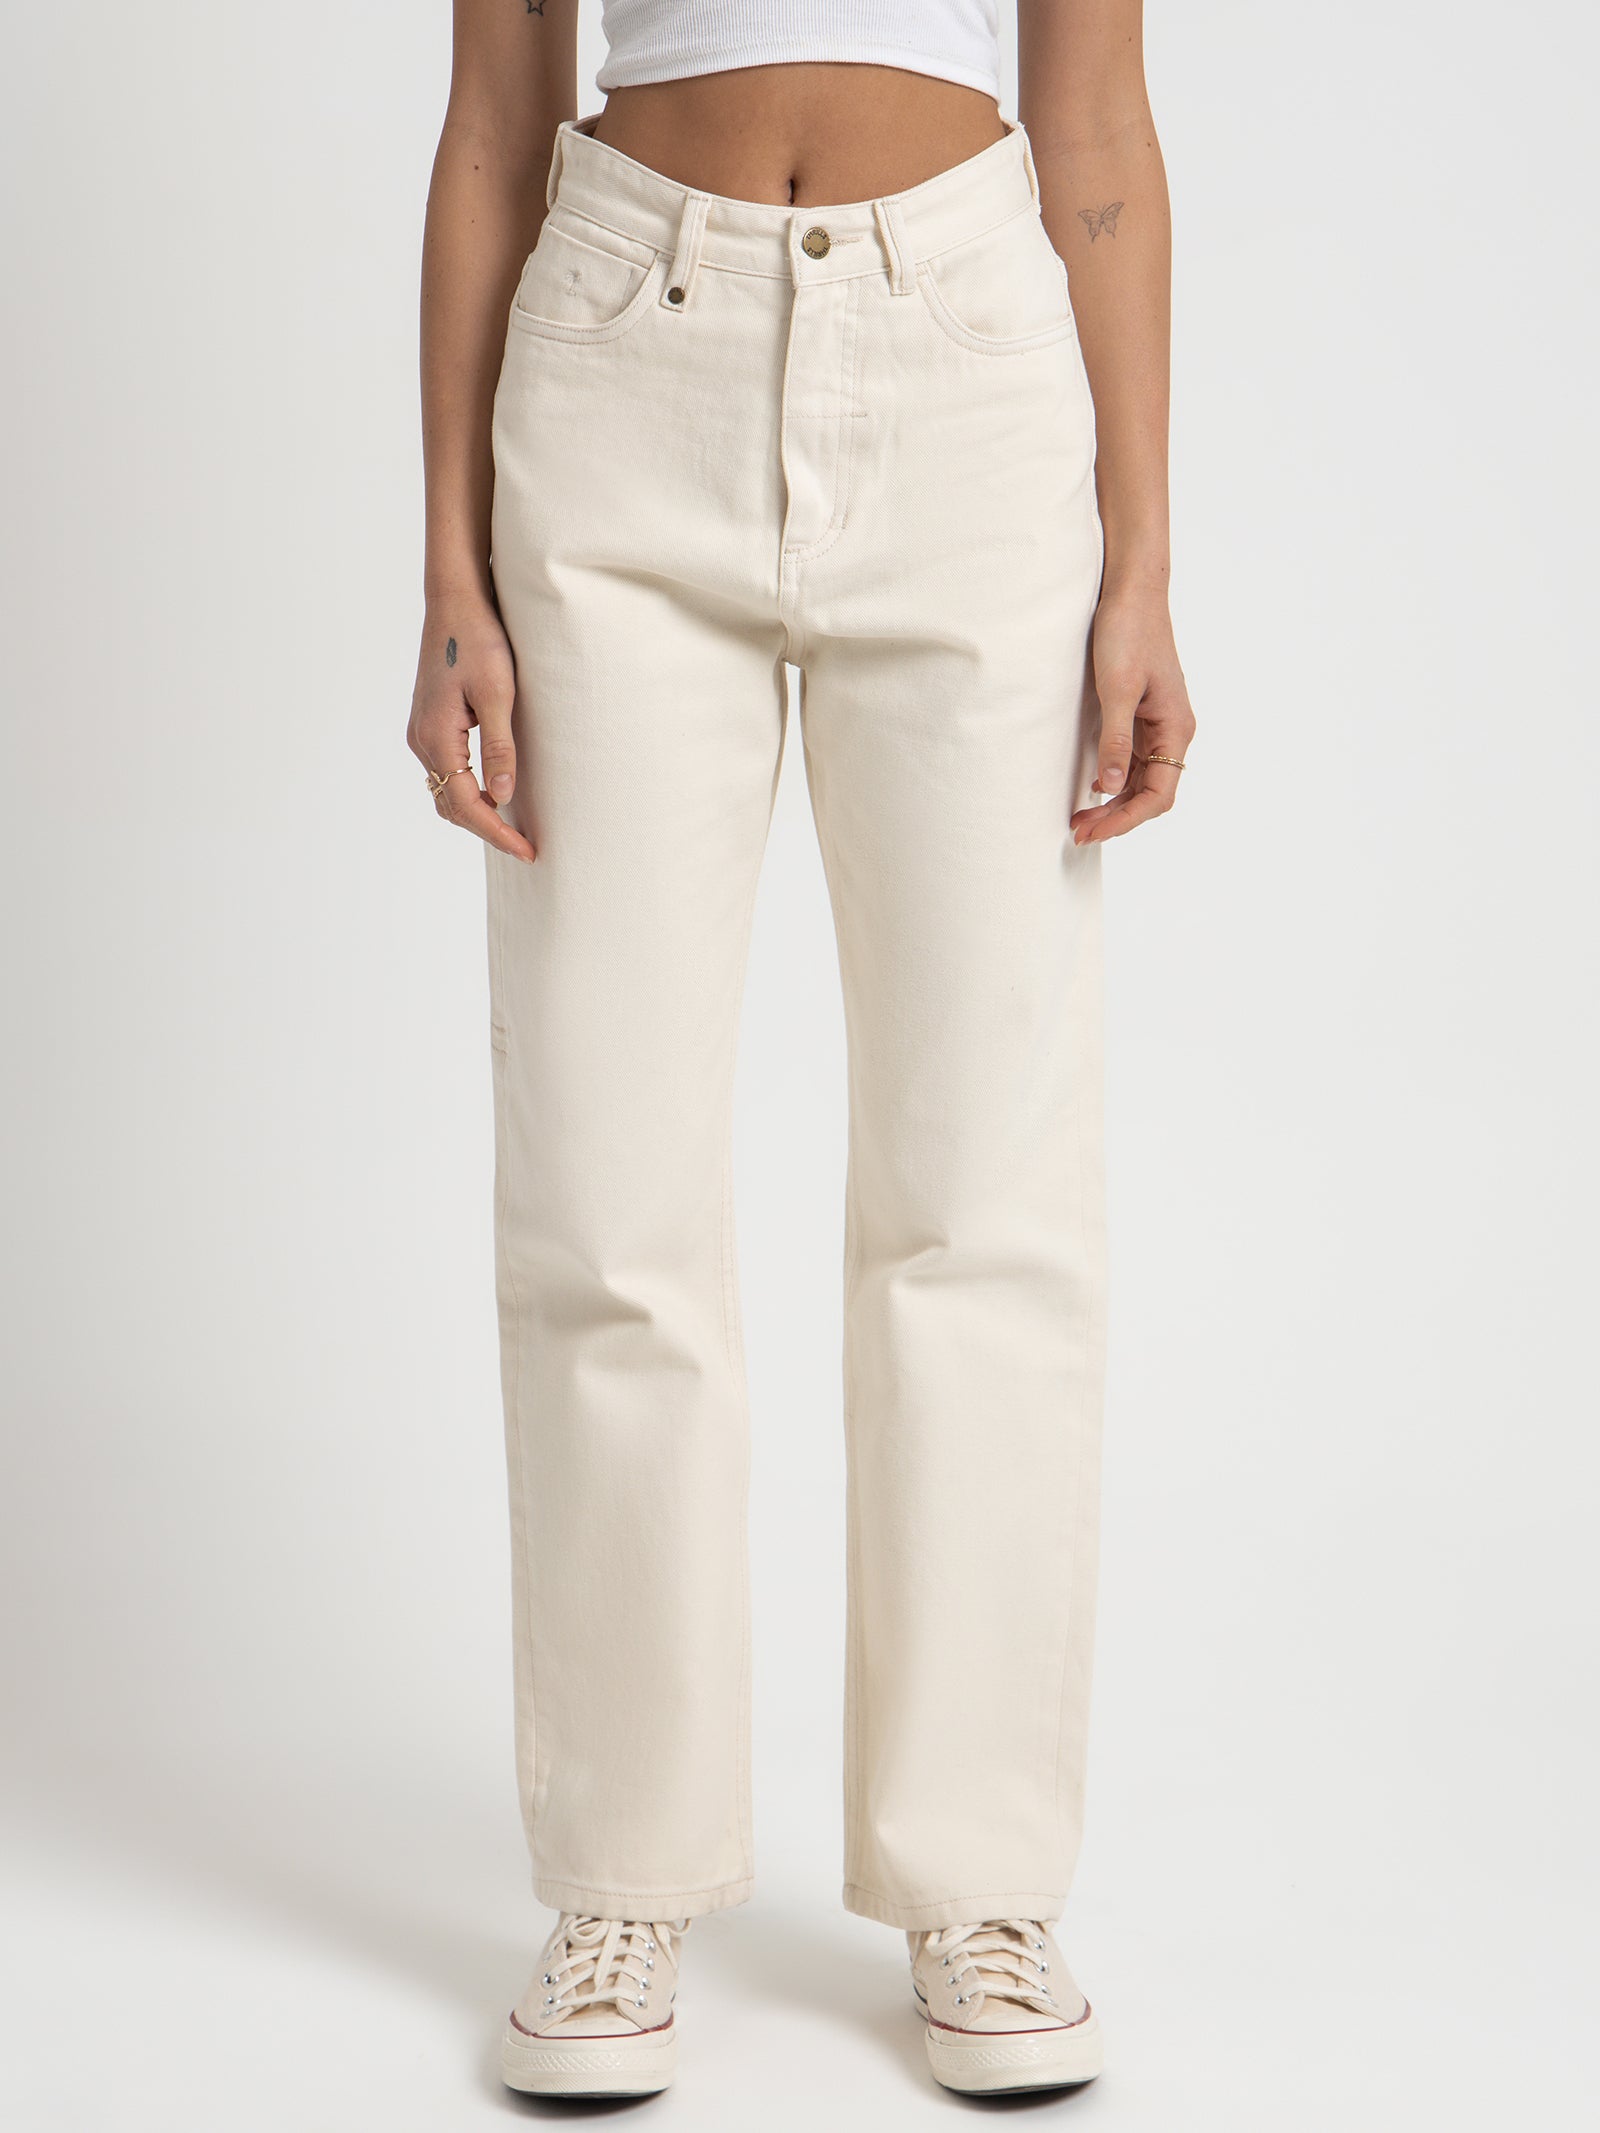 Pulp Jeans in Heritage White